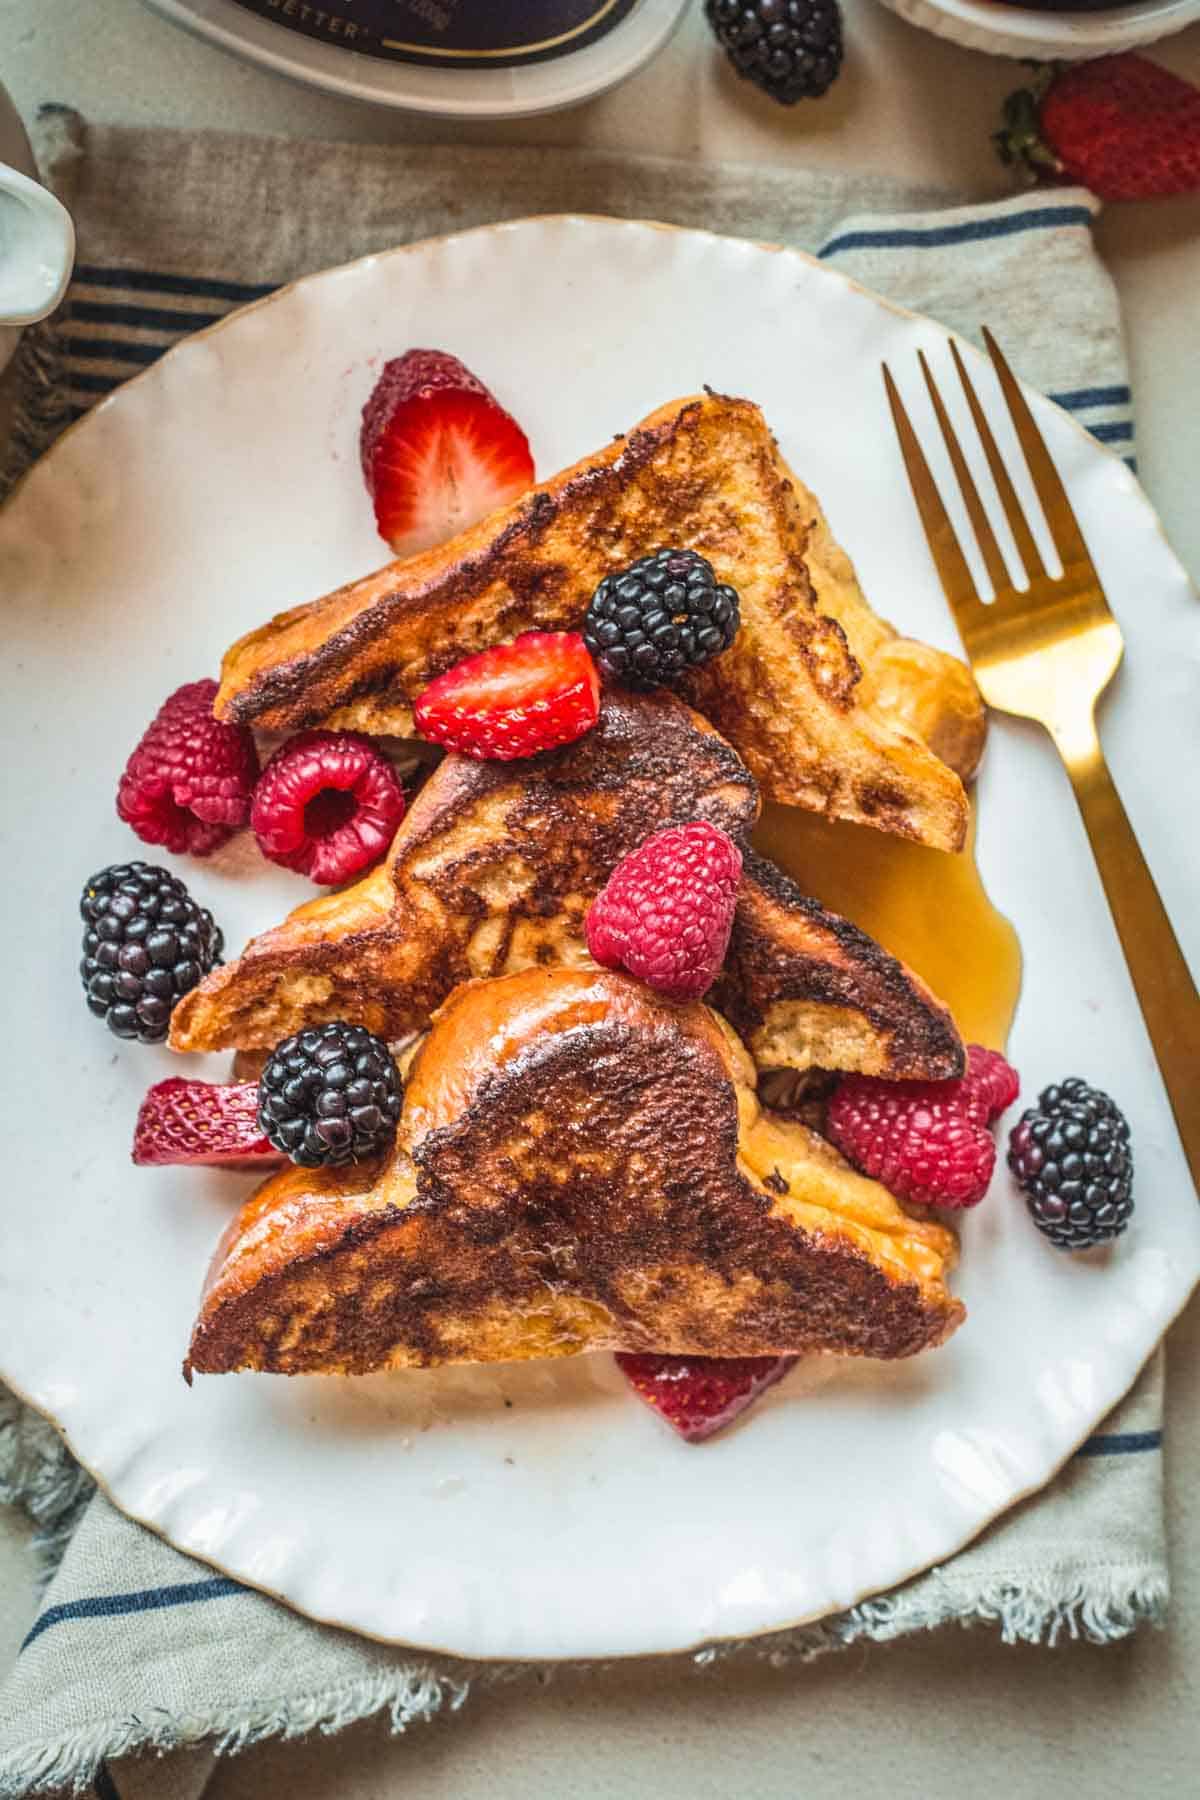 Three triangles of French toast on a plate with maple syrup and berries.